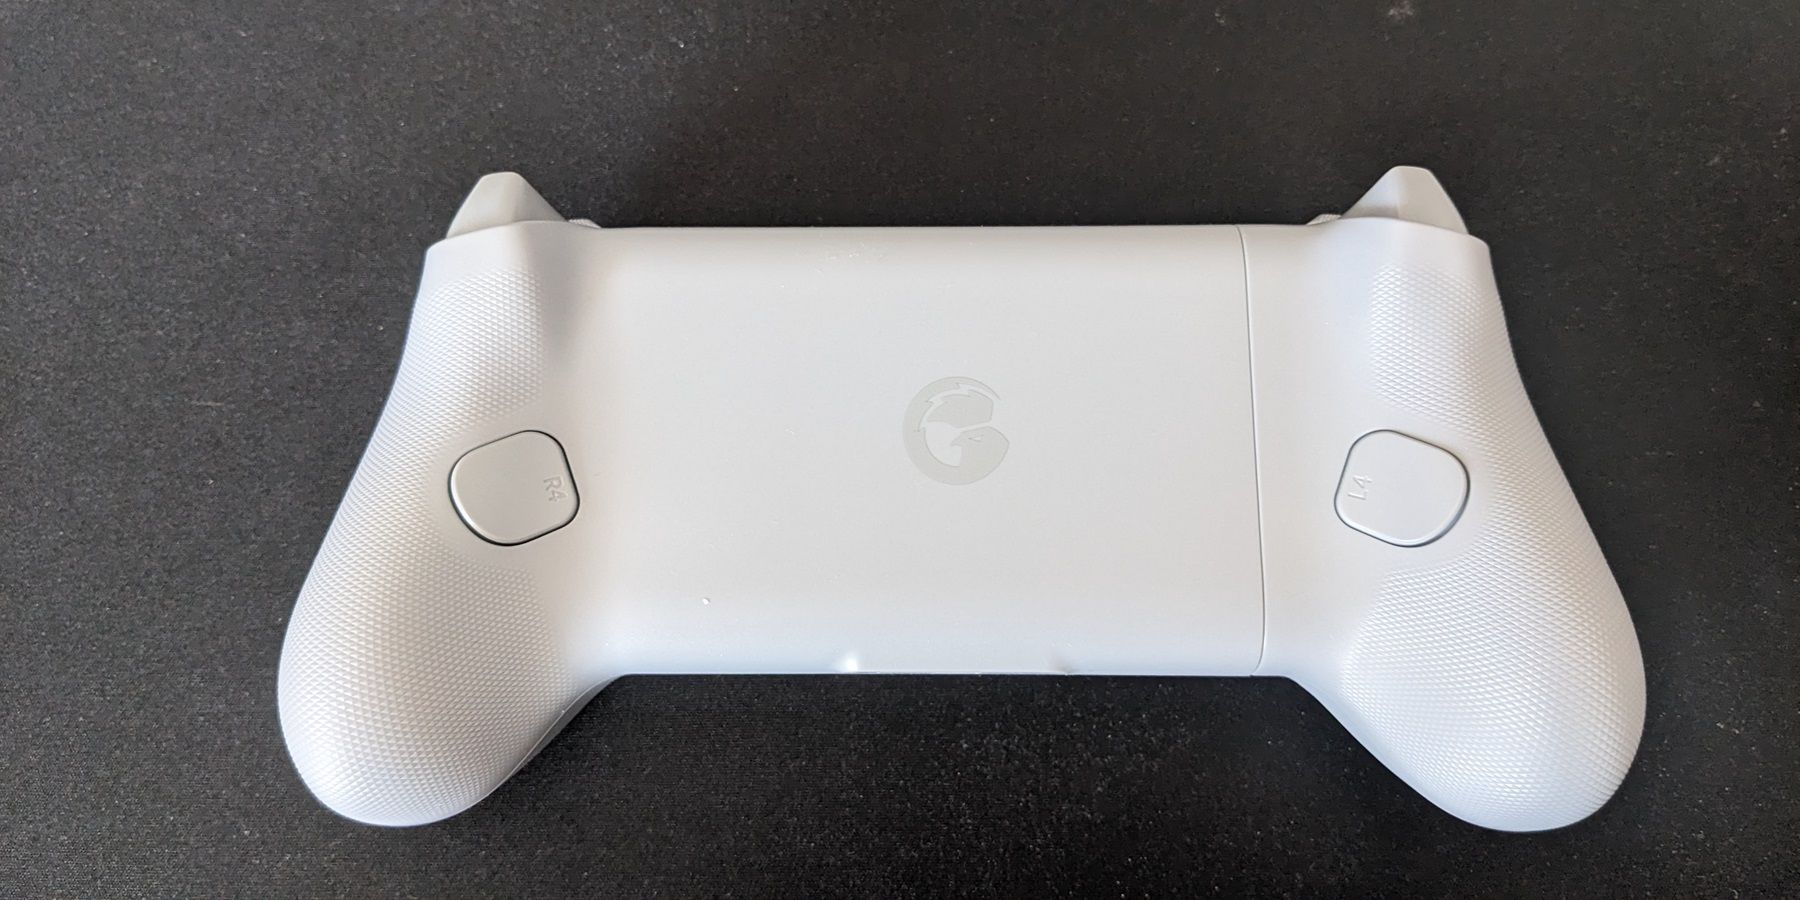 GameSir G8 Galileo Gamepad Review : New mode of mobile gameplay, enjoy the  host experience